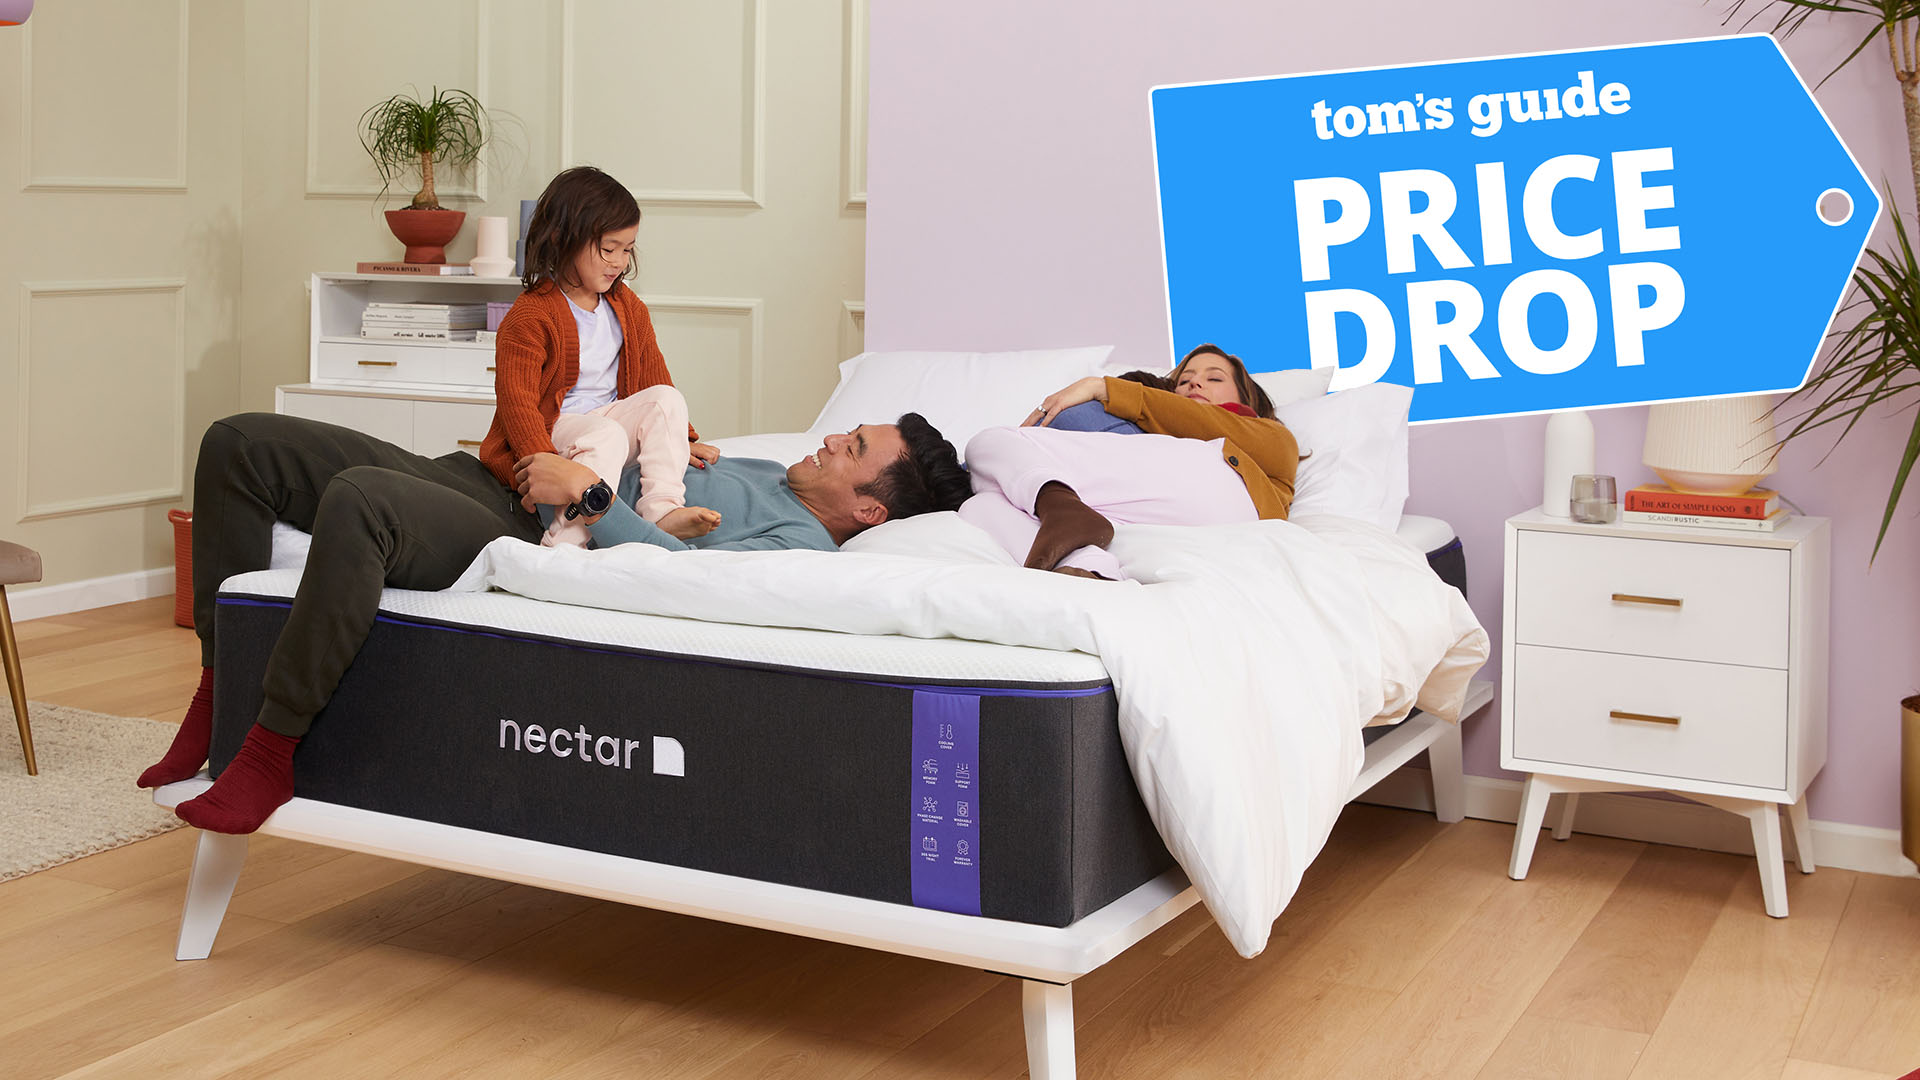 Nectar mattress with family in it, and price drop flag overlaid